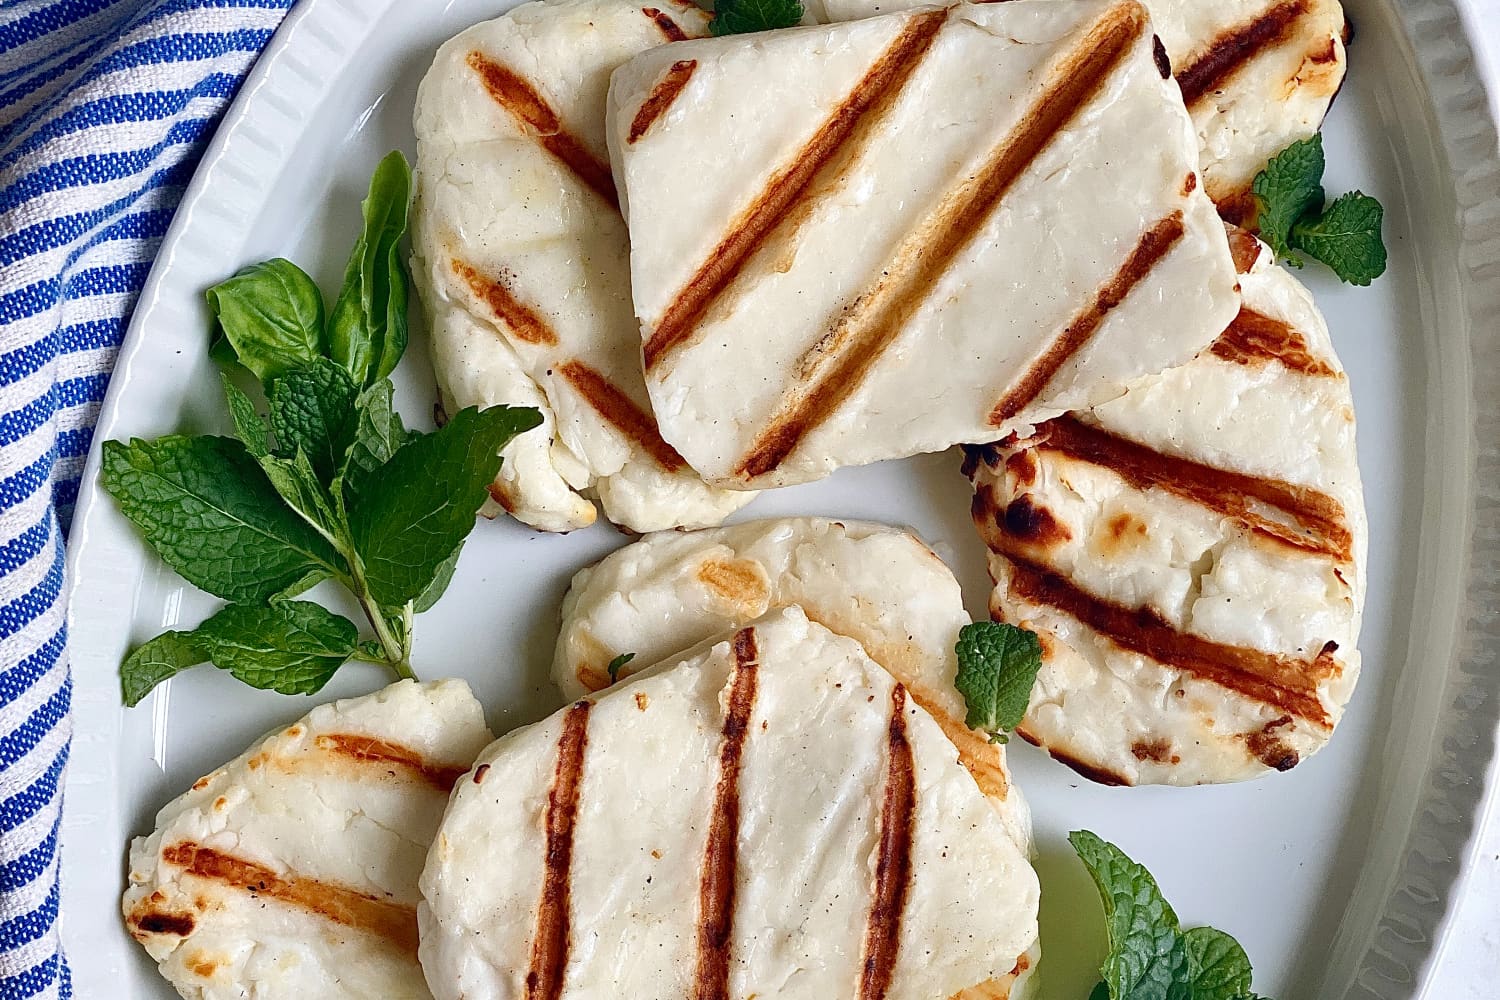 Cuopom: Grilled Halloumi Recipe (Fast & Easy 2-Ingredient) - The Kitchn